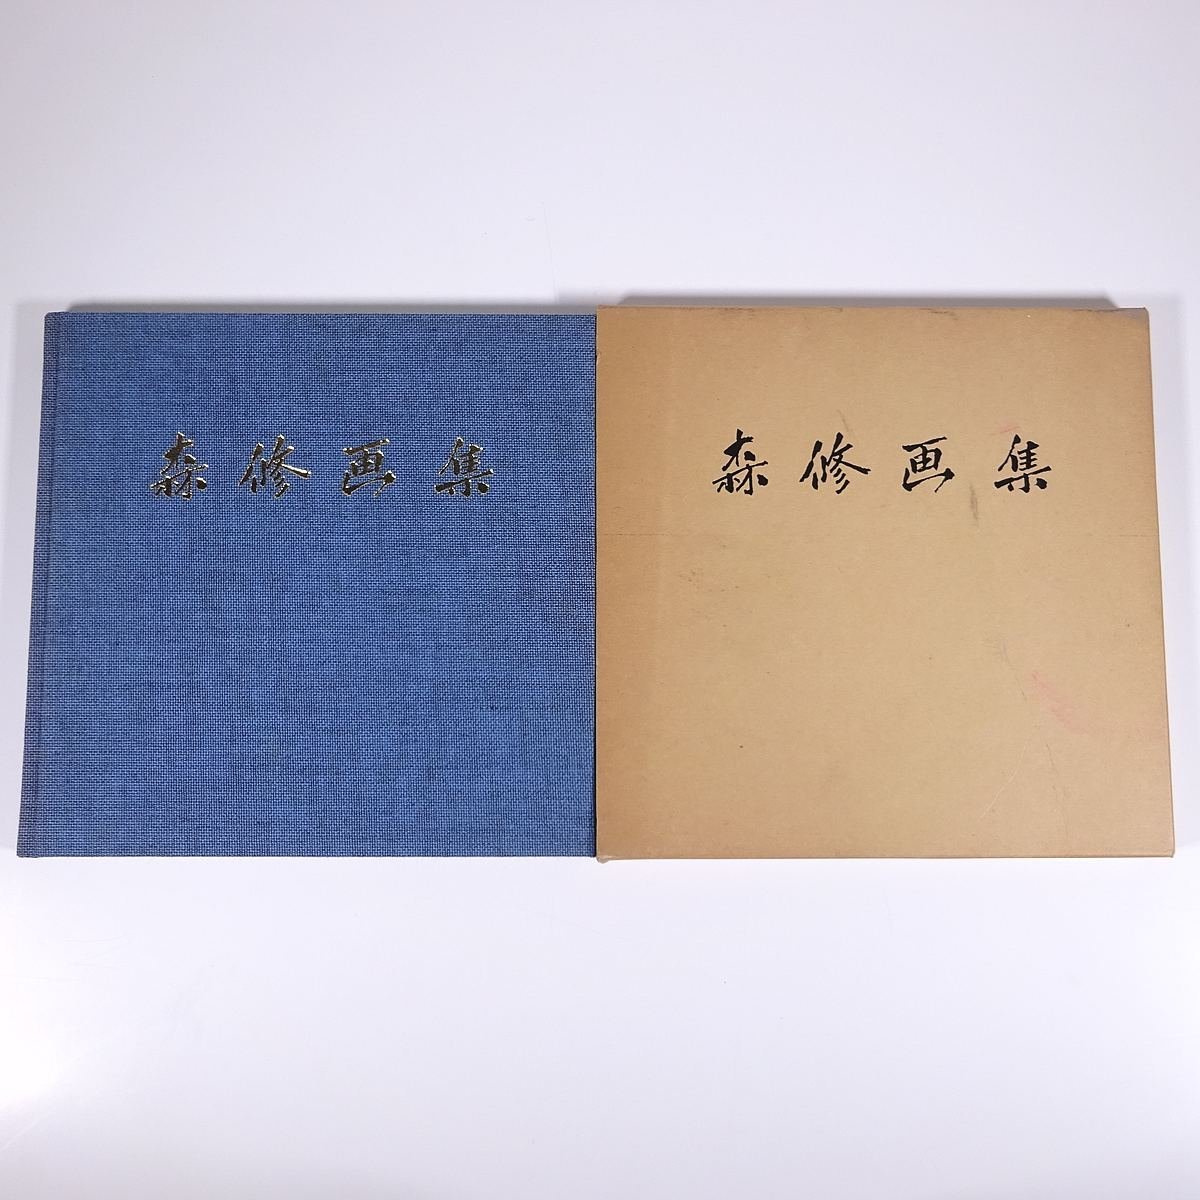 Mori Osamu Art Collection Edited by Mori Naohiko Ehime Prefecture Seki Co., Ltd. 1988 Large-format boxed book Illustrations Catalog Art Fine art Painting Artbook Artwork Collection Western painting, Painting, Art Book, Collection, Art Book